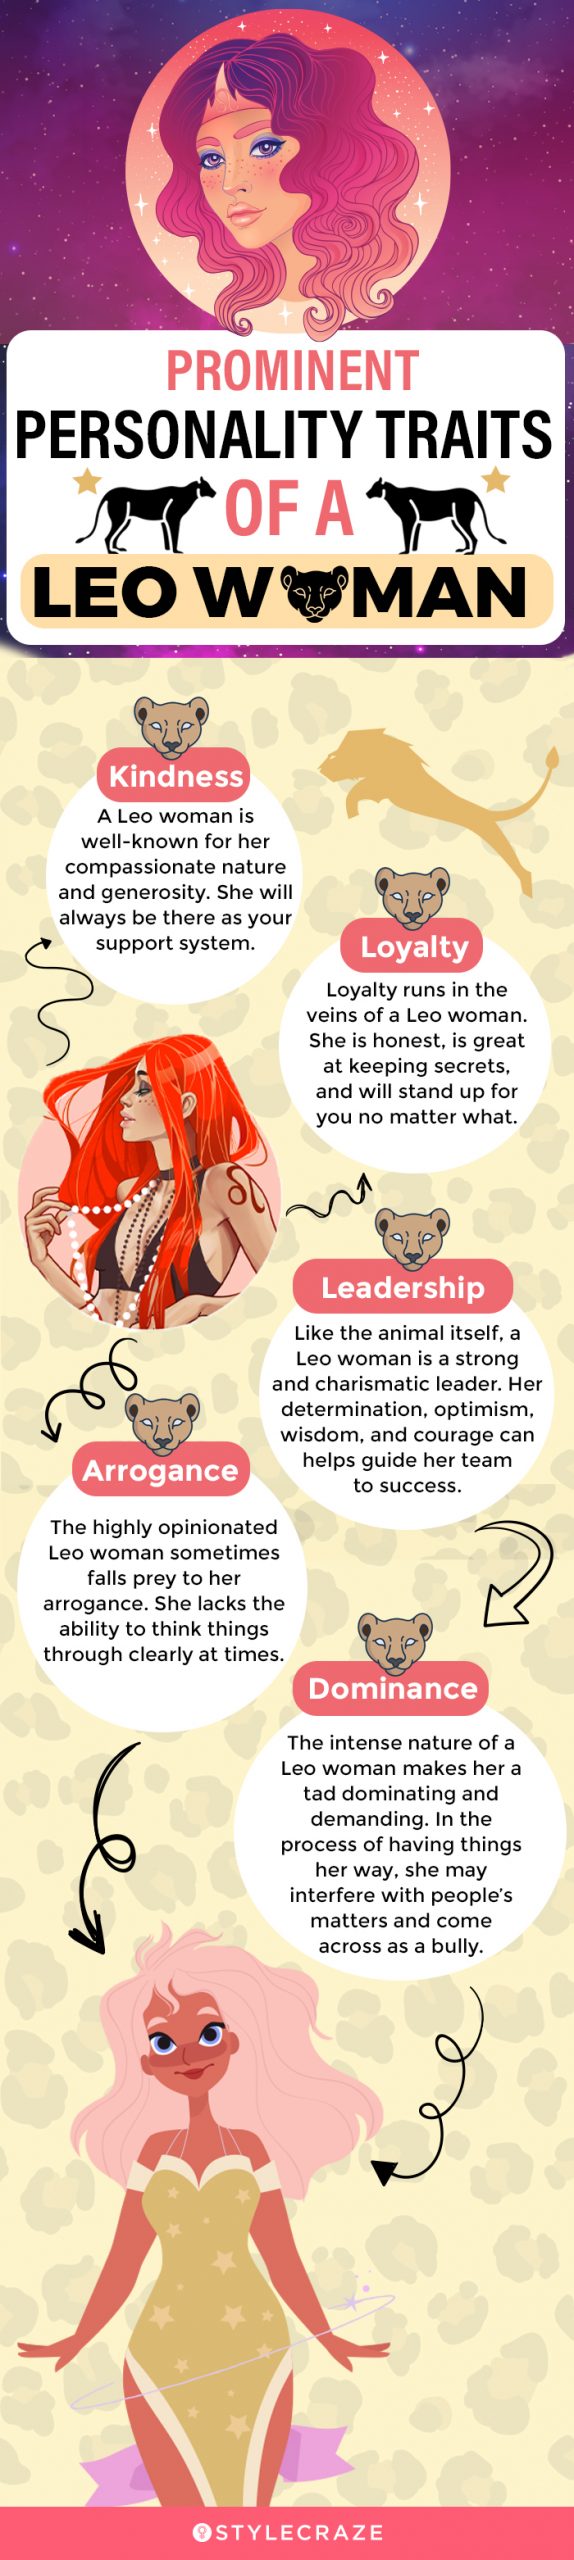 prominent personality traits of a leo woman [infographic]